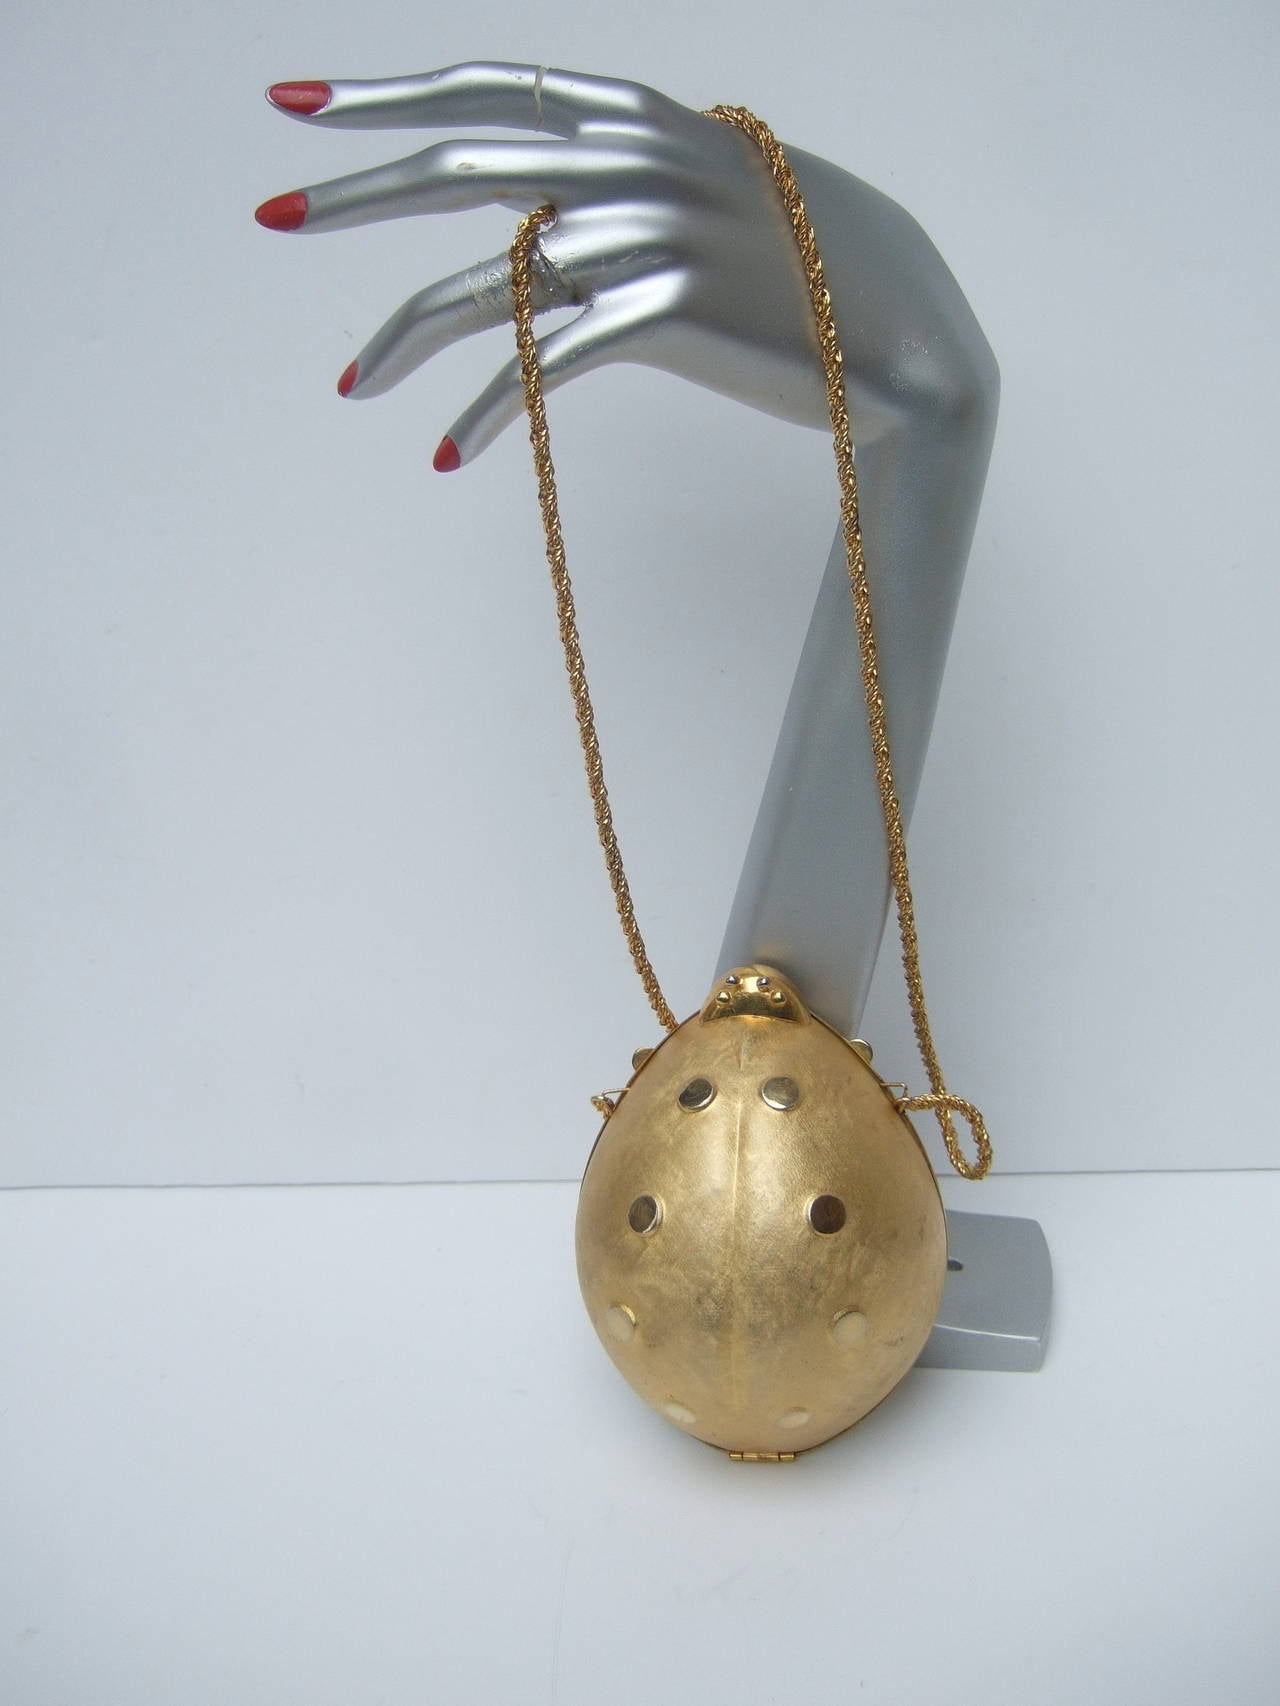 Opulent gilt metal lady bug evening bag Made in Italy c 1970
The unique gilt metal purse is designed in the shape 
of a charming lady bug. The exterior covering has 
a satiny brushed finish juxtaposed with smooth shiny 
circular dots. The lady